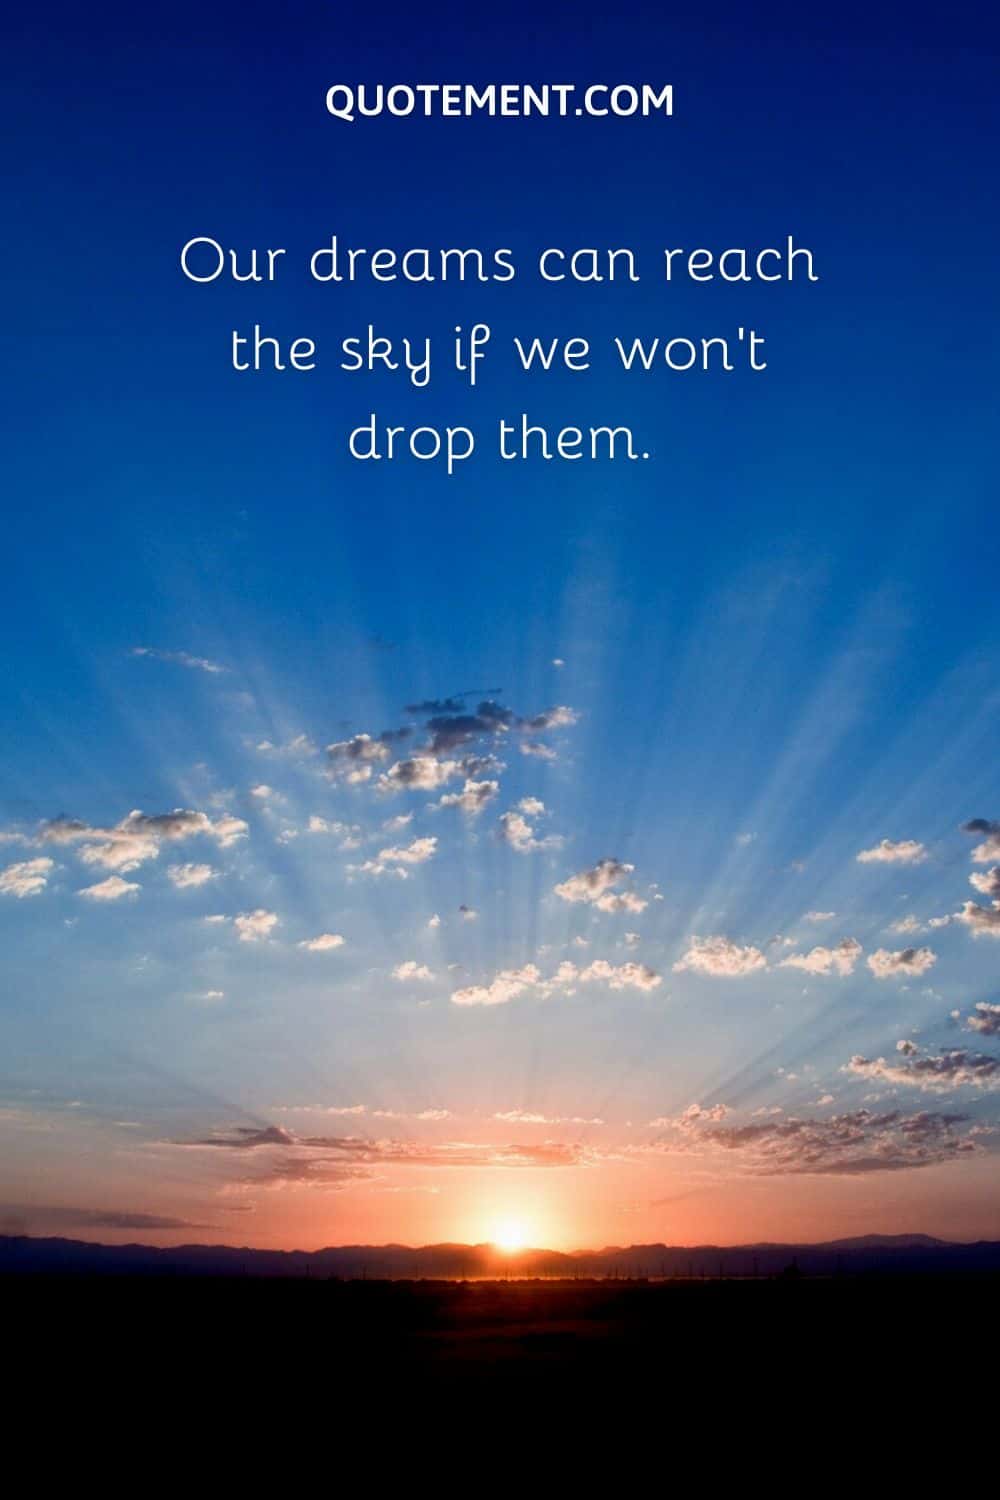 Our dreams can reach the sky if we won’t drop them.